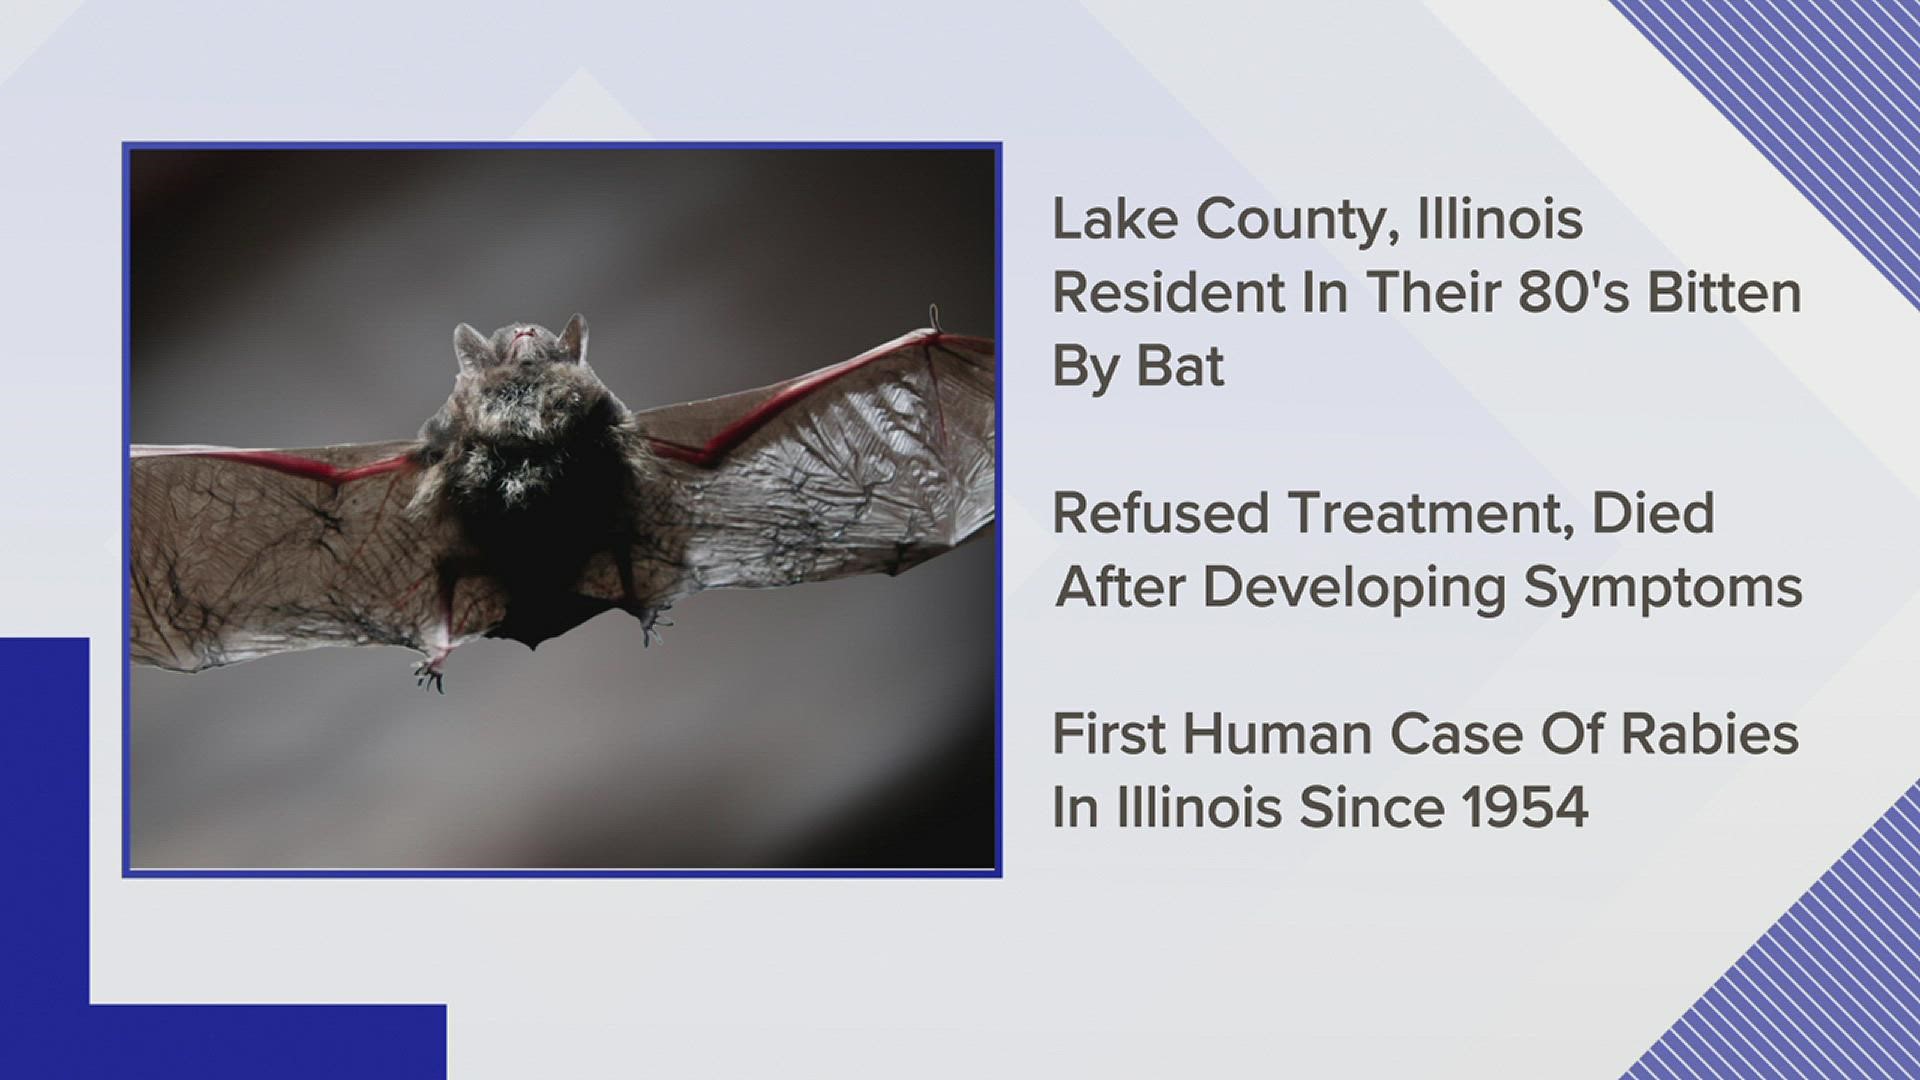 This is the first human case of rabies in Illinois since 1954.